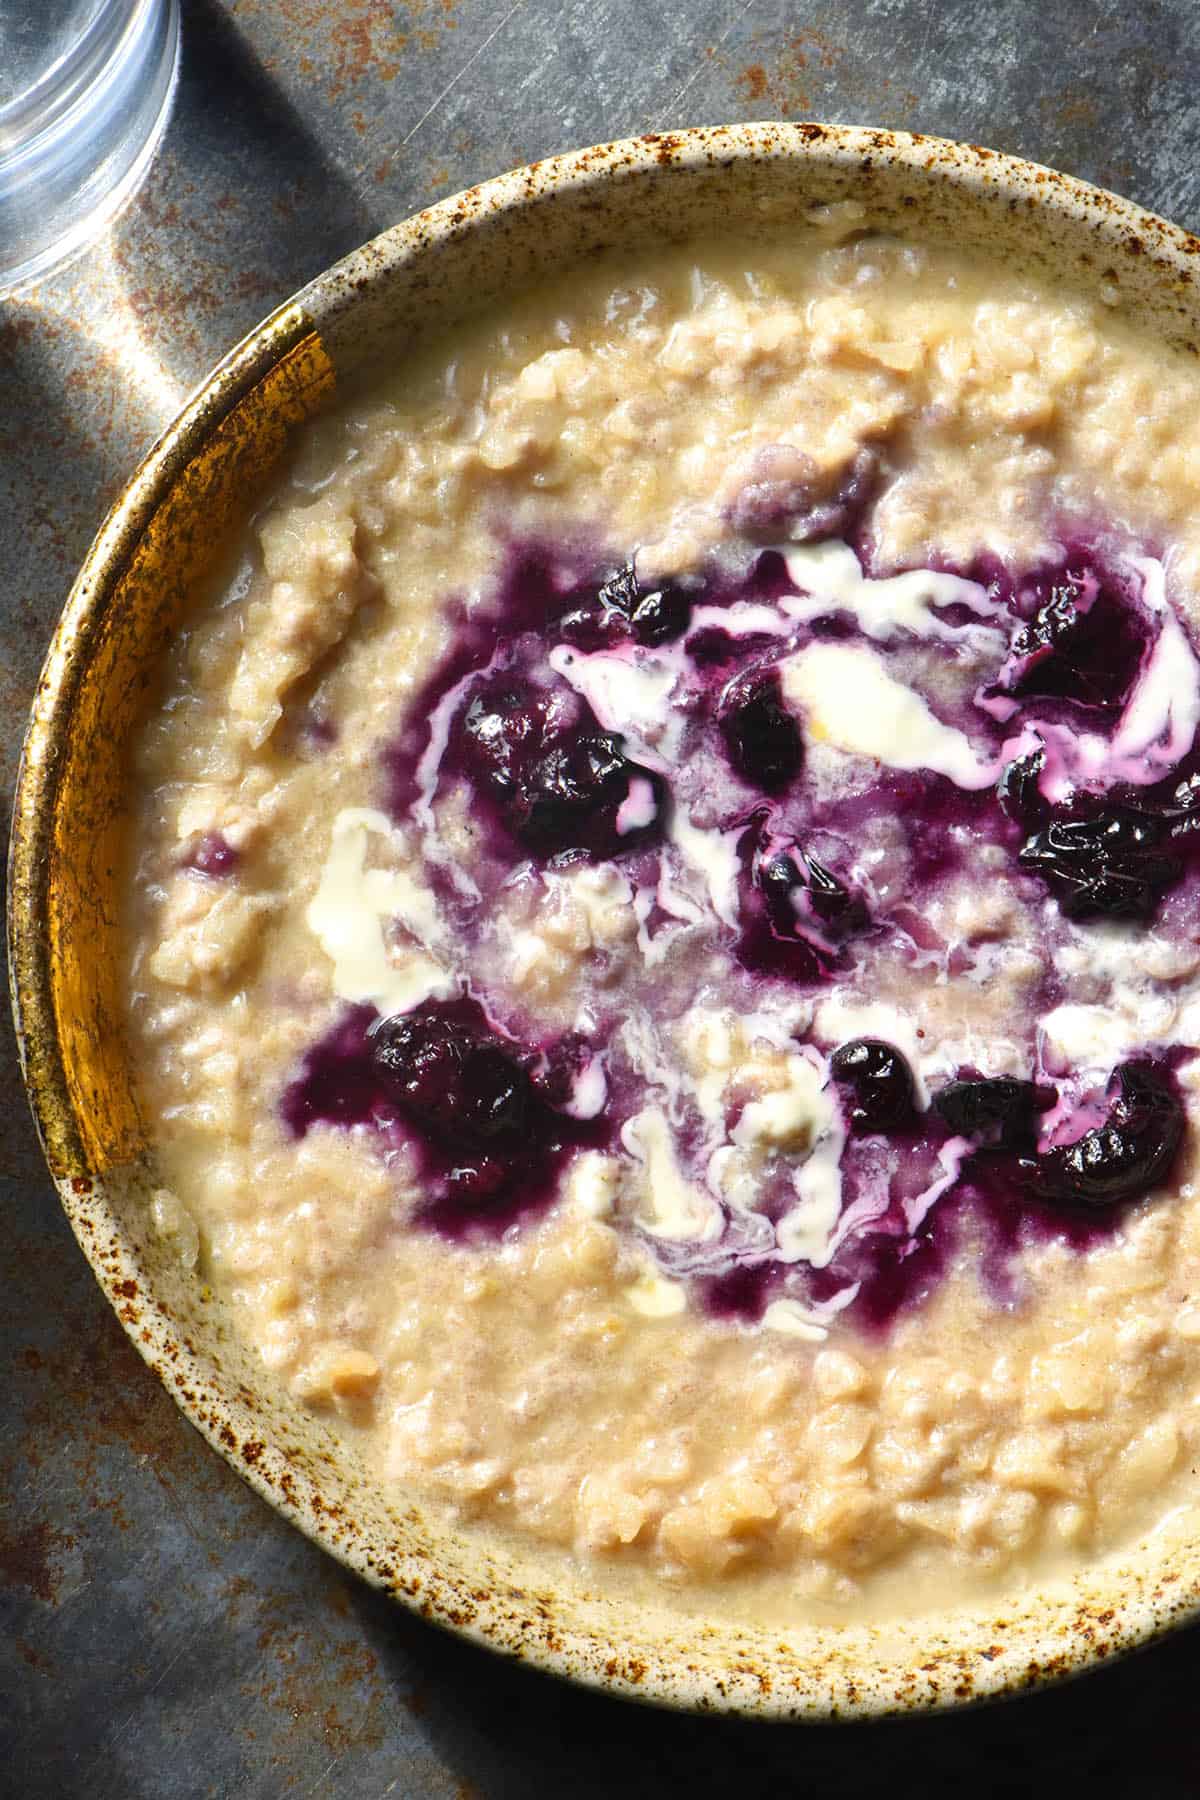 A close up aerial view of a bowl of gluten free porridge topped with blueberry compote and swirled with cream. The wide mouthed ceramic bowl sits atop a dark blue steel backdrop with a glass of water in the top left corner